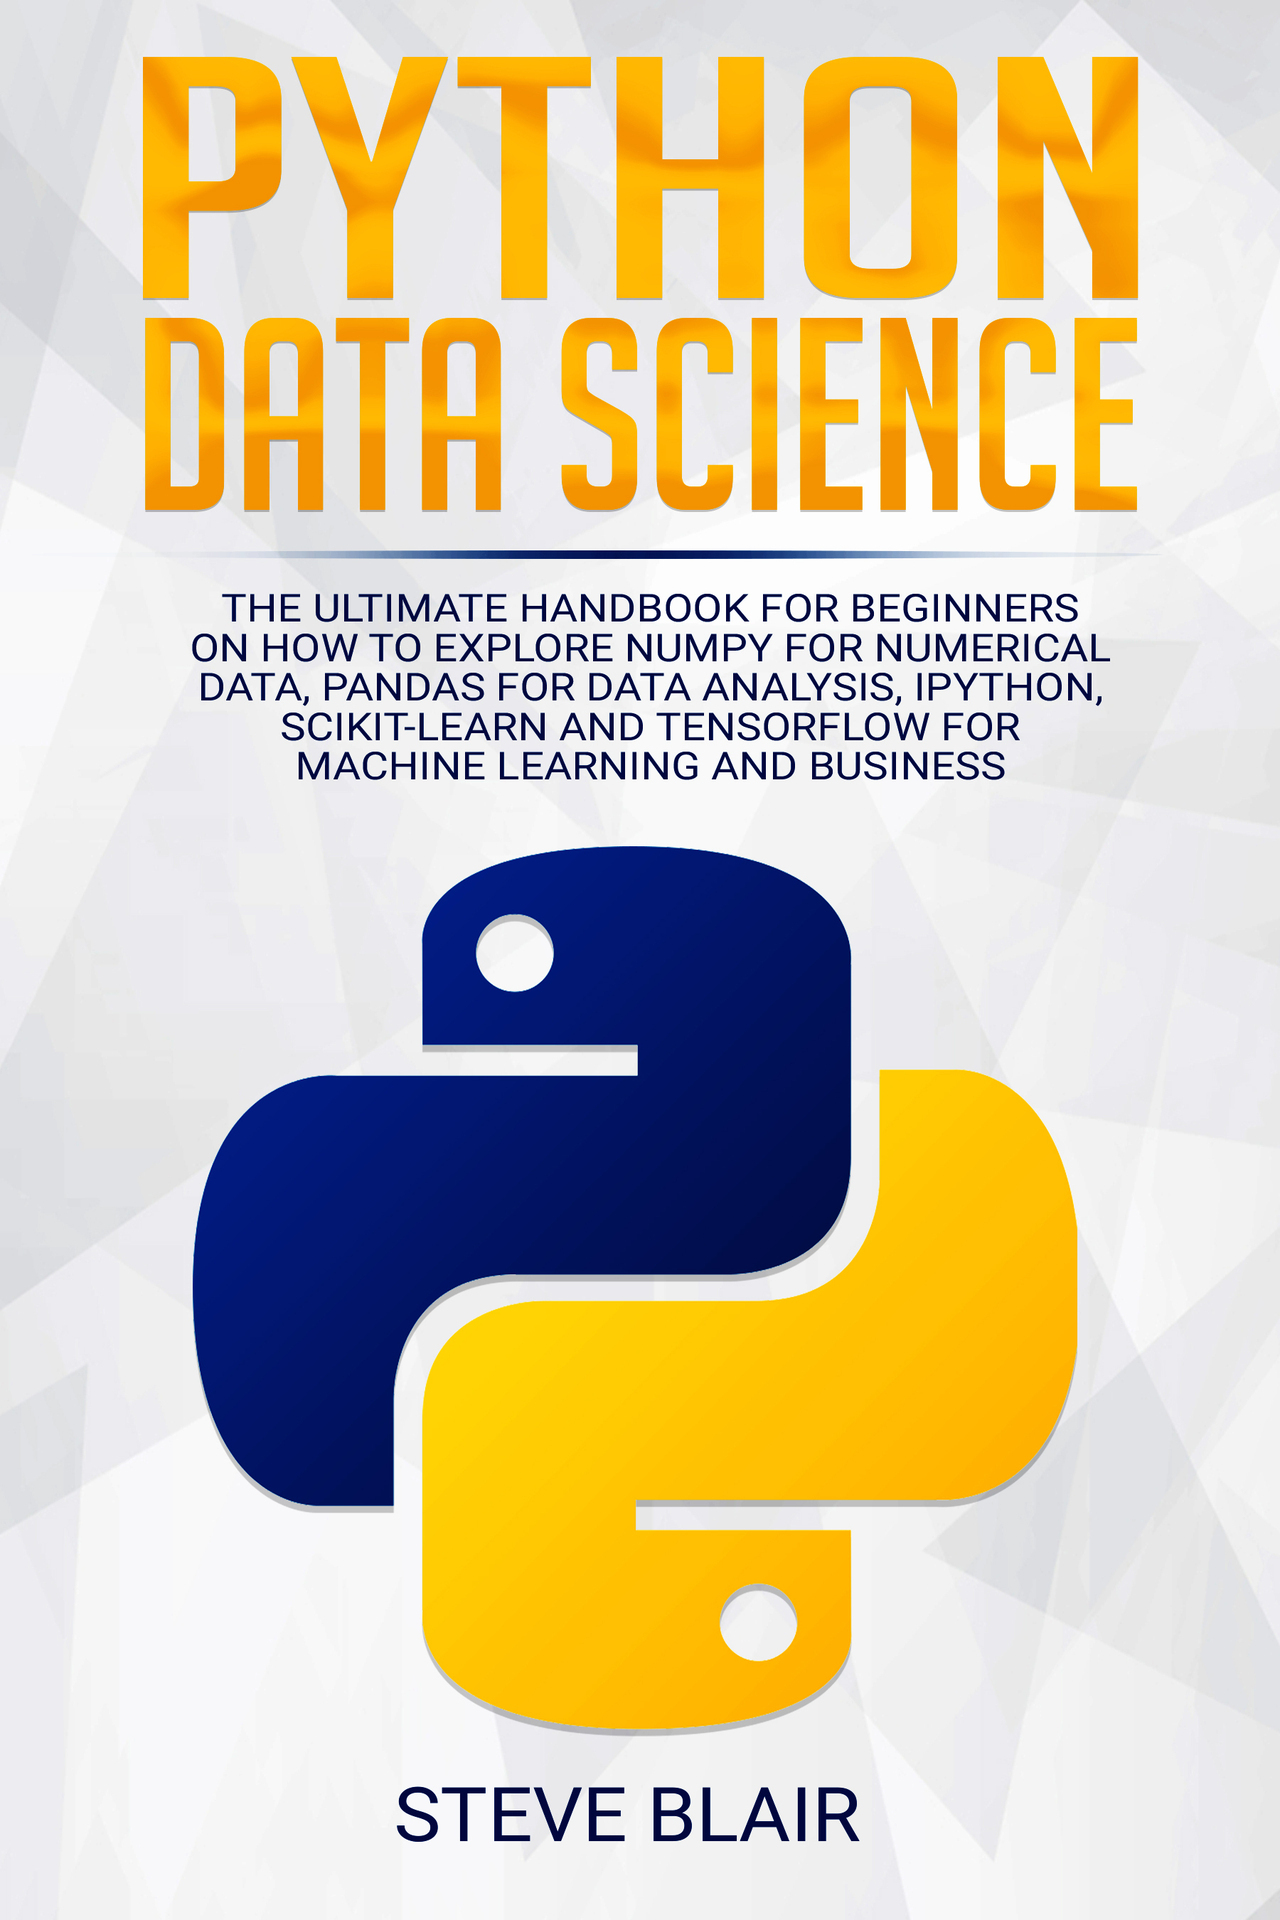 Python Data Science: The Ultimate Guide on What You Need to Know to Work With Data Using Python